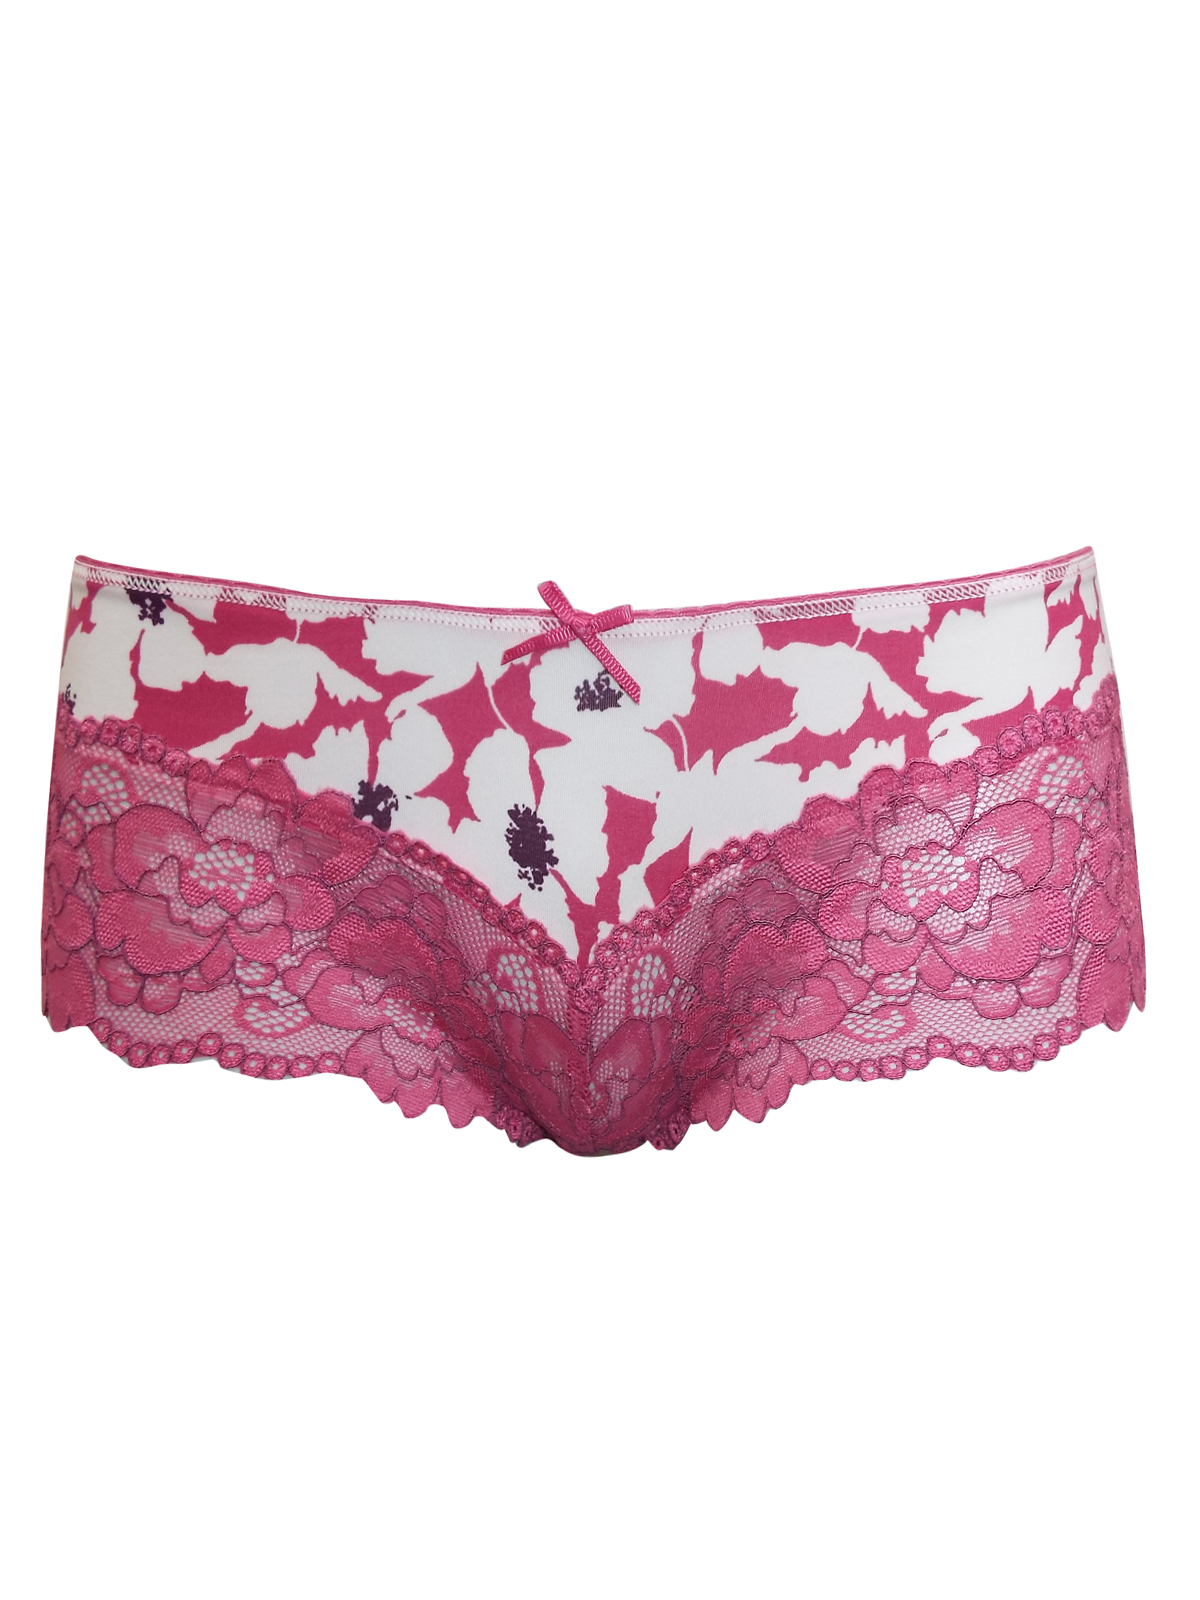 Marks and Spencer - - M&5 PINK-WHITE Isabella Floral Lace Printed ...